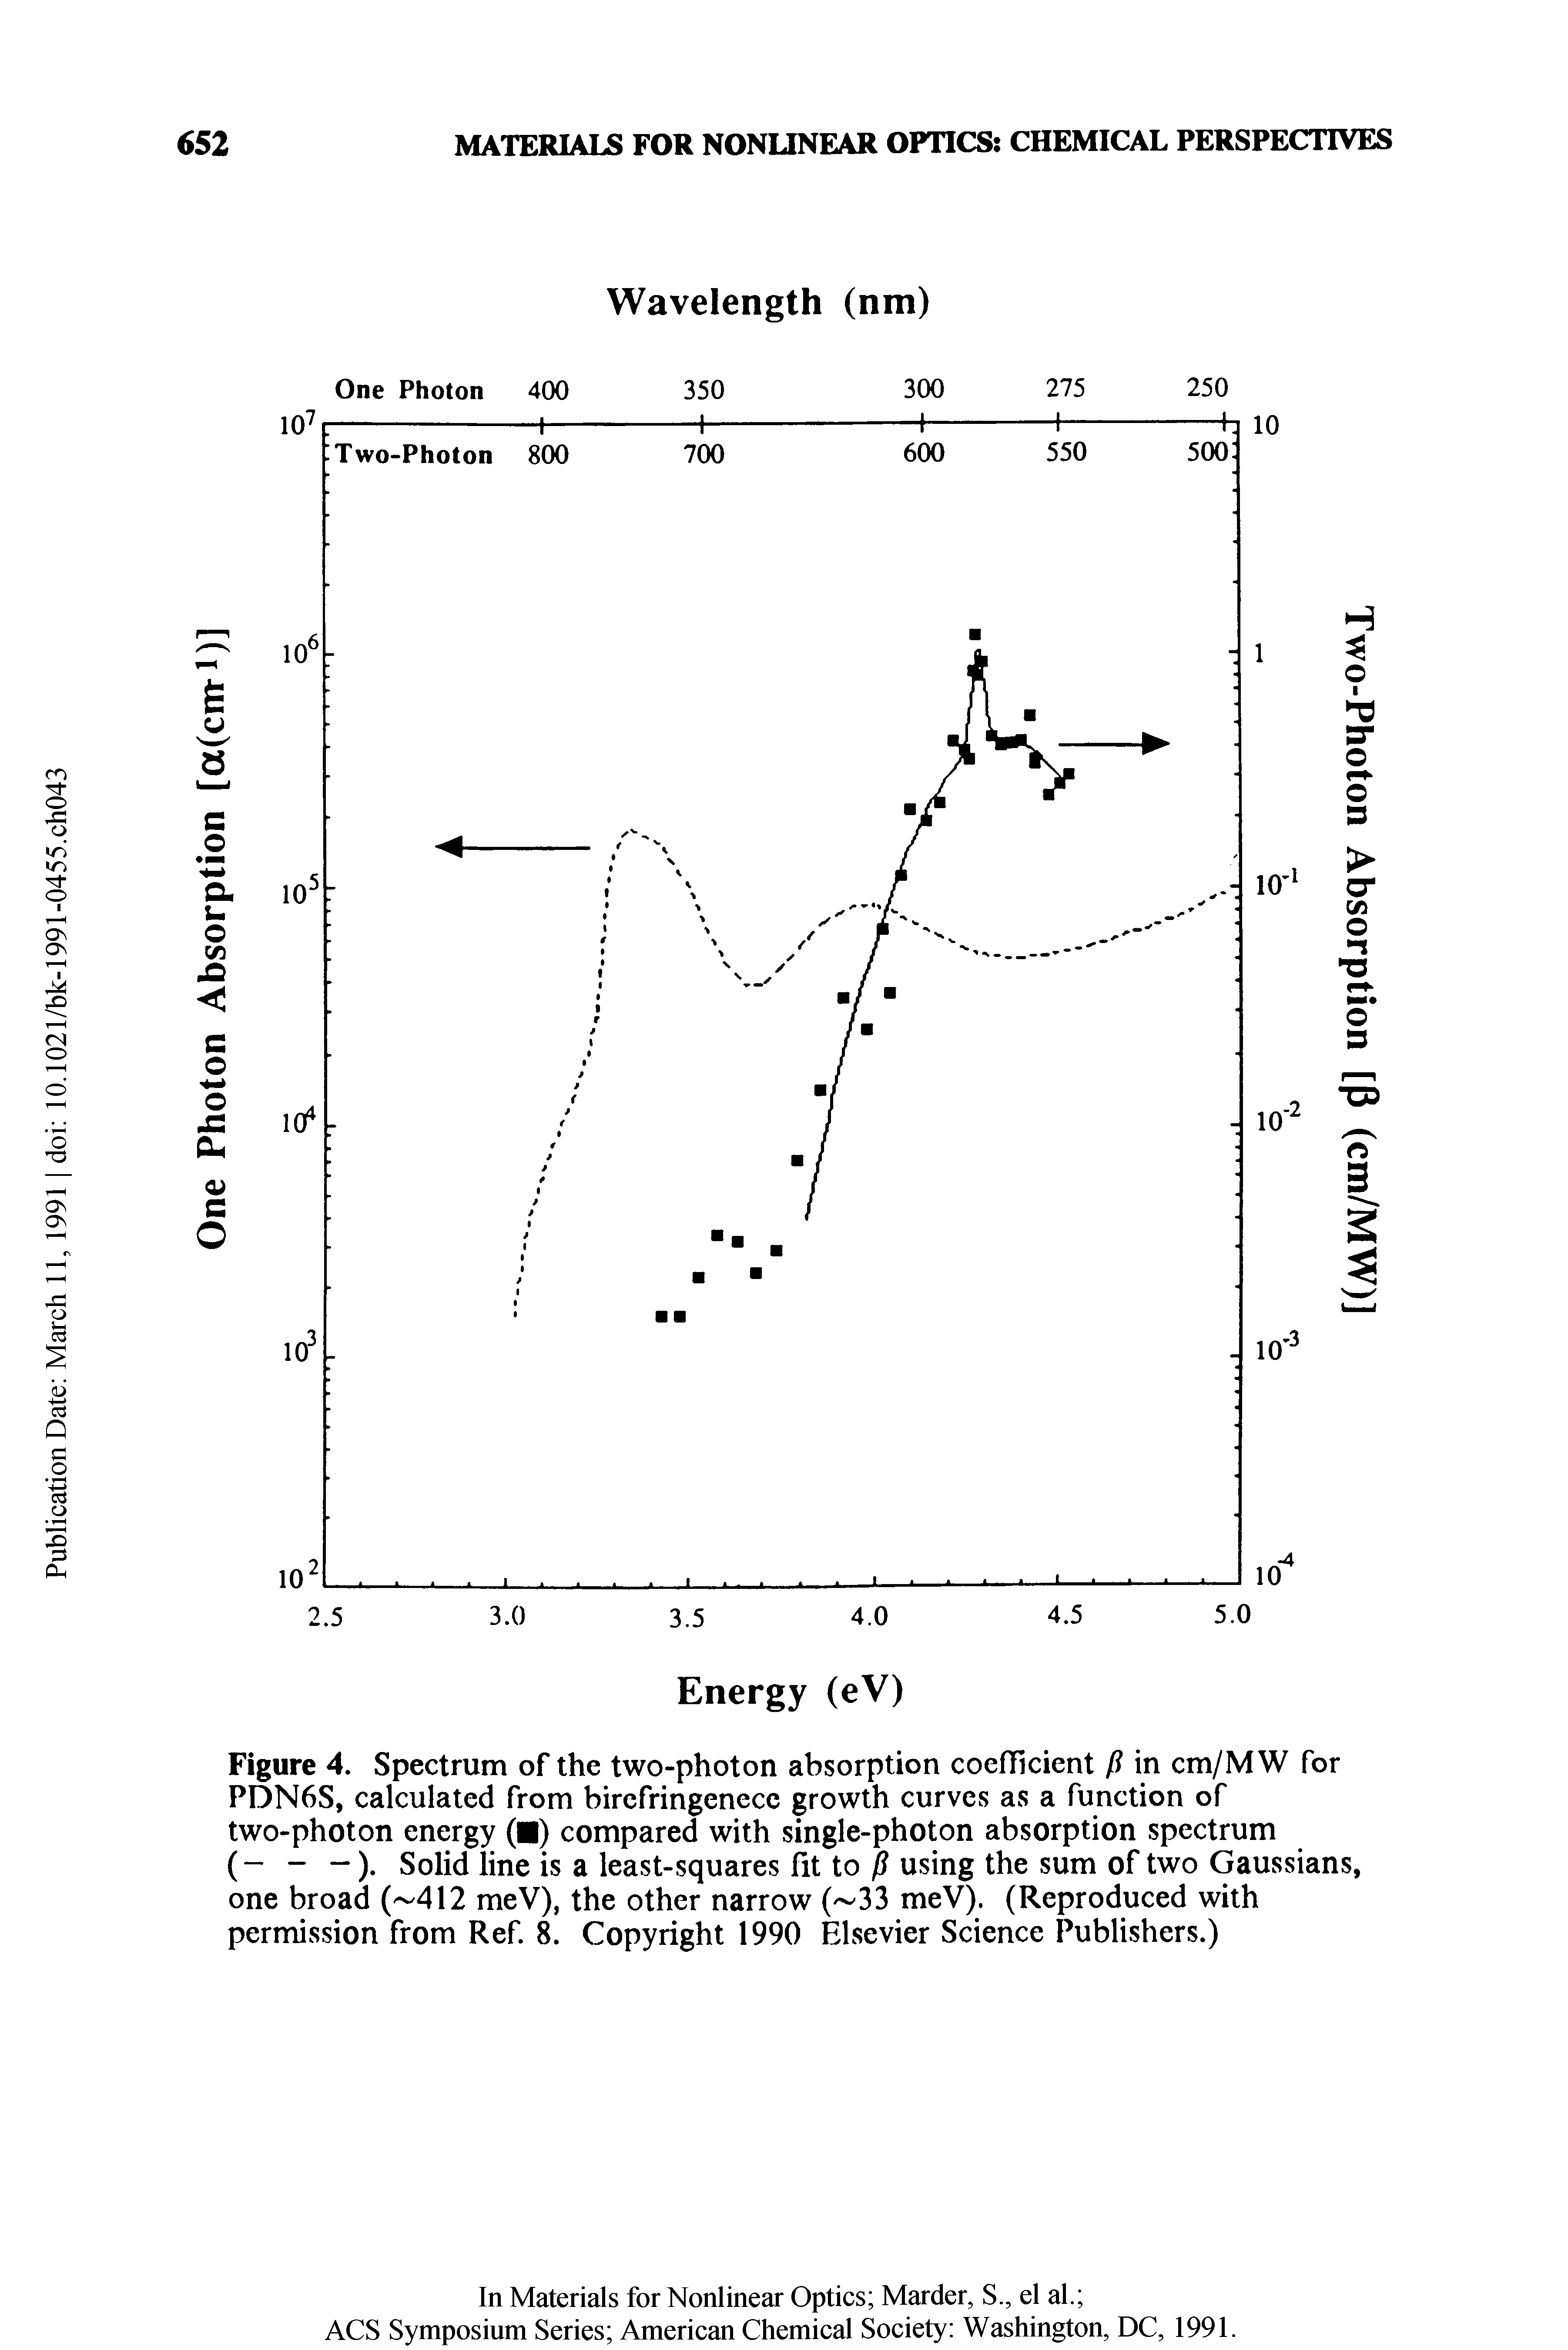 Figure 4. Spectrum of the two-photon absorption coefficient P in cm/MW for PDN6S, calculated from birefringenece growth curves as a function of two-photon energy ( ) compared with single-photon absorption spectrum (- - -). Solid line is a least-squares fit to p using the sum of two Gaussians, one broad ( 412 meV), the other narrow ( 33 meV). (Reproduced with permission from Ref. 8. Copyright 1990 Elsevier Science Publishers.)...